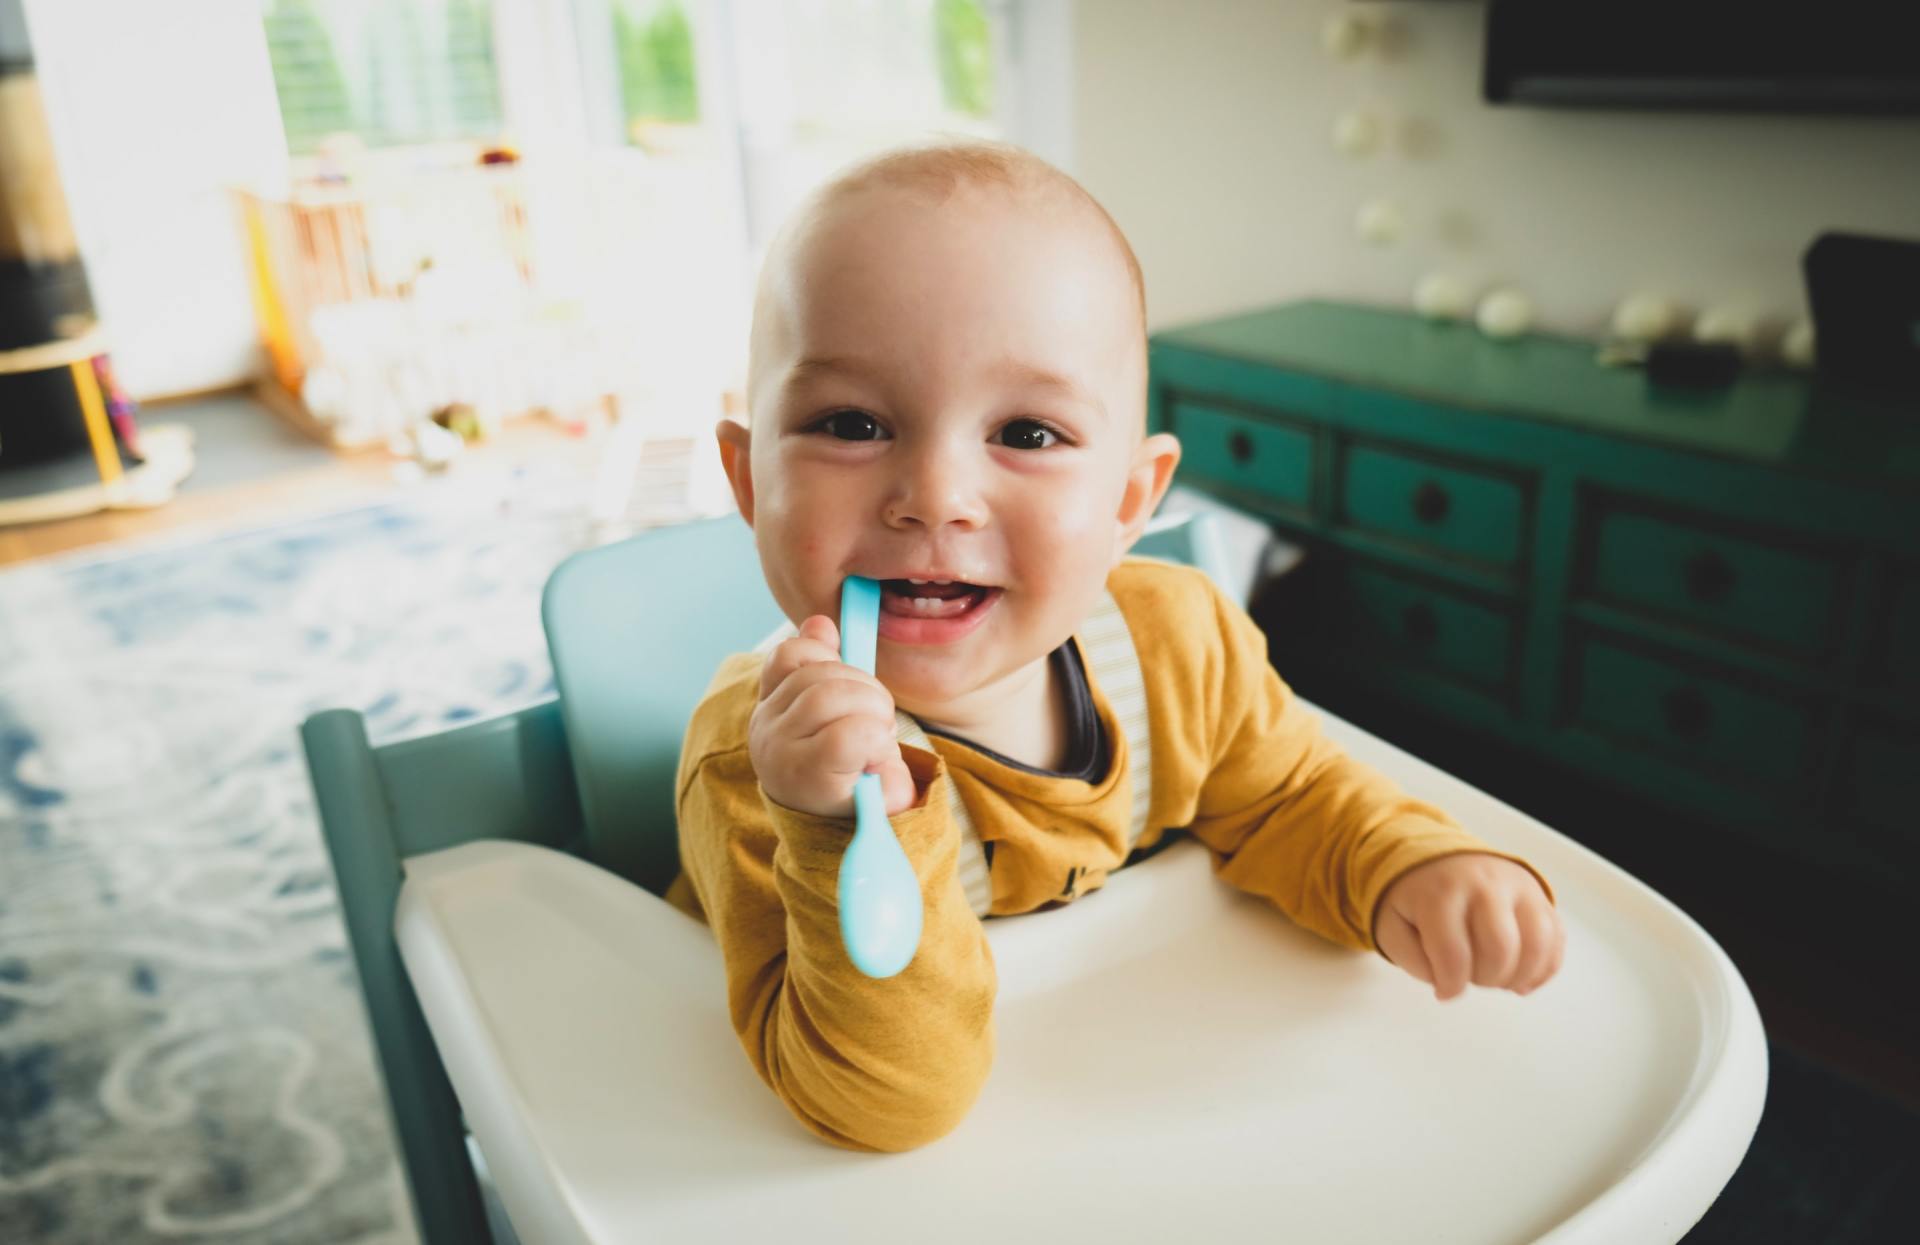 Pediatric Dentistry - a baby is sitting in a high chair with a spoon in his mouth .